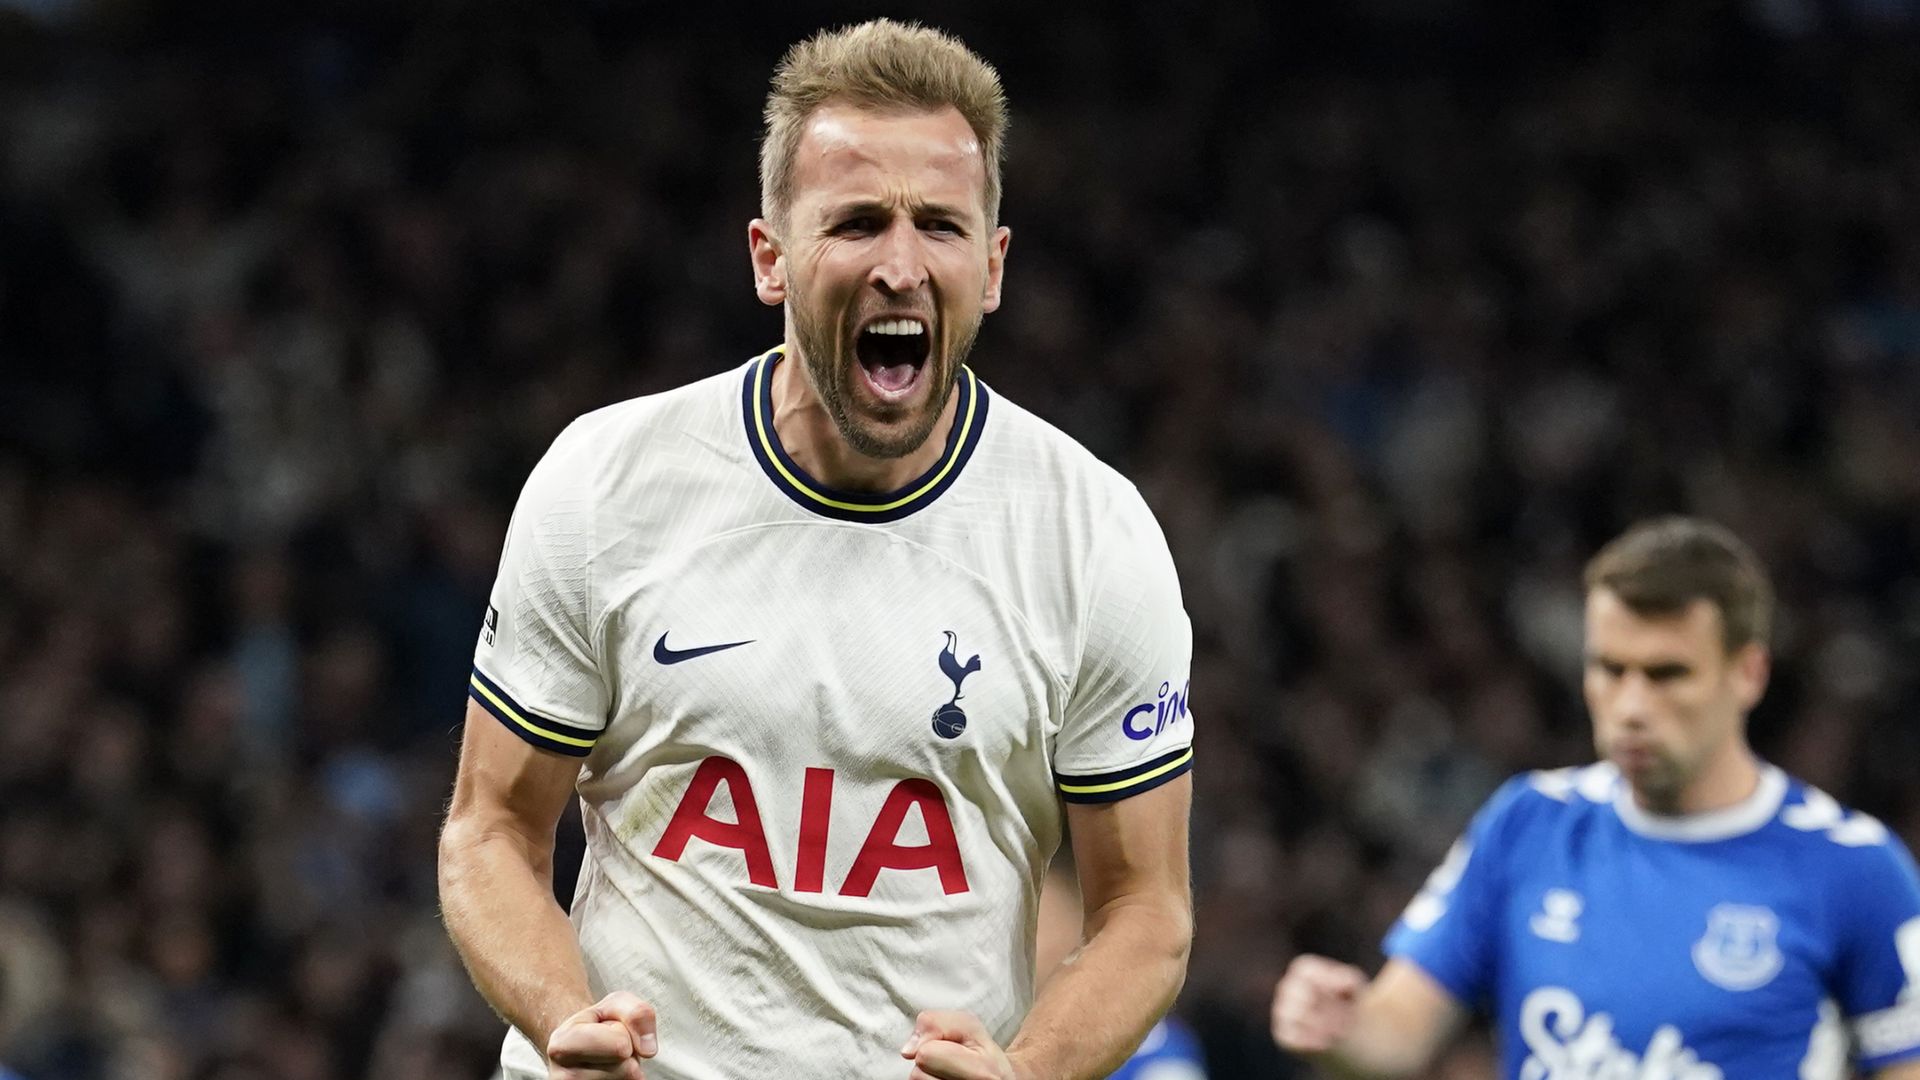 Kane helps Spurs beat Everton and close in on Arsenal | Lampard rues misses